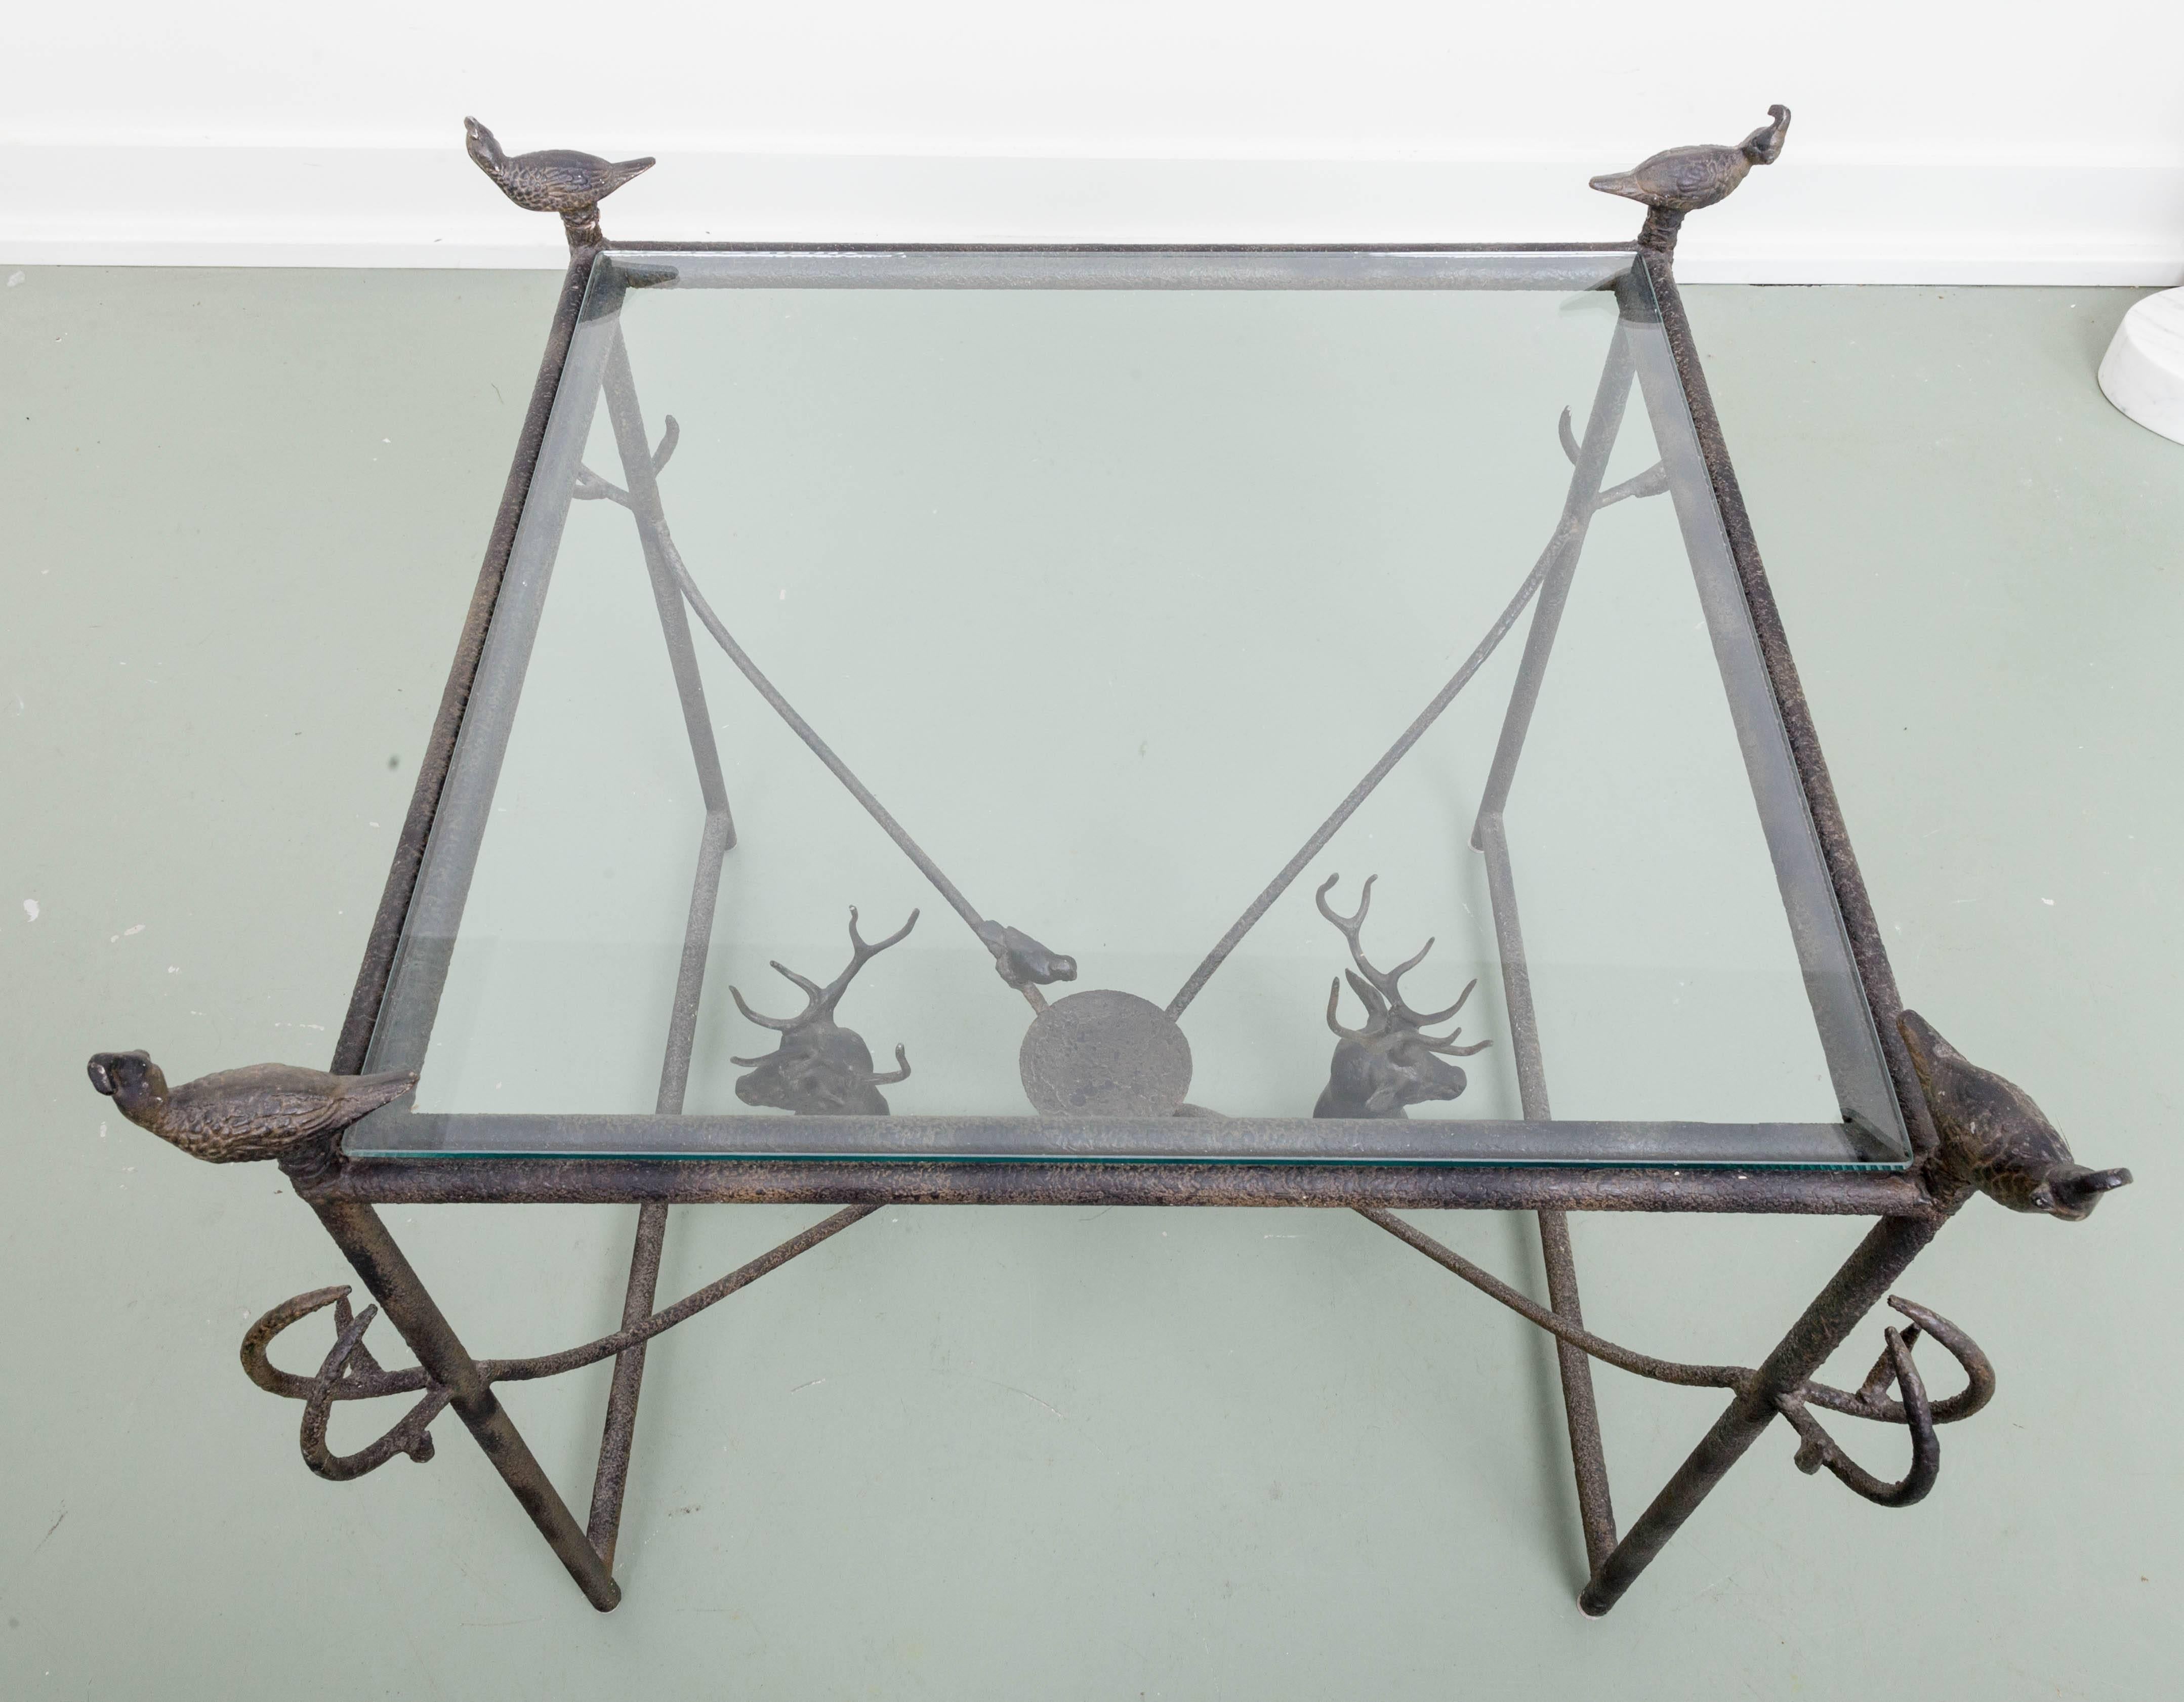 Perfect hunting lodge table, metal table with decorative rough applied finish. Four Quail finials. Glass top. H-stretcher with connecting branches to legs finishing up with stylized Antlers on legs. Two four points stag heads on stretcher flanking